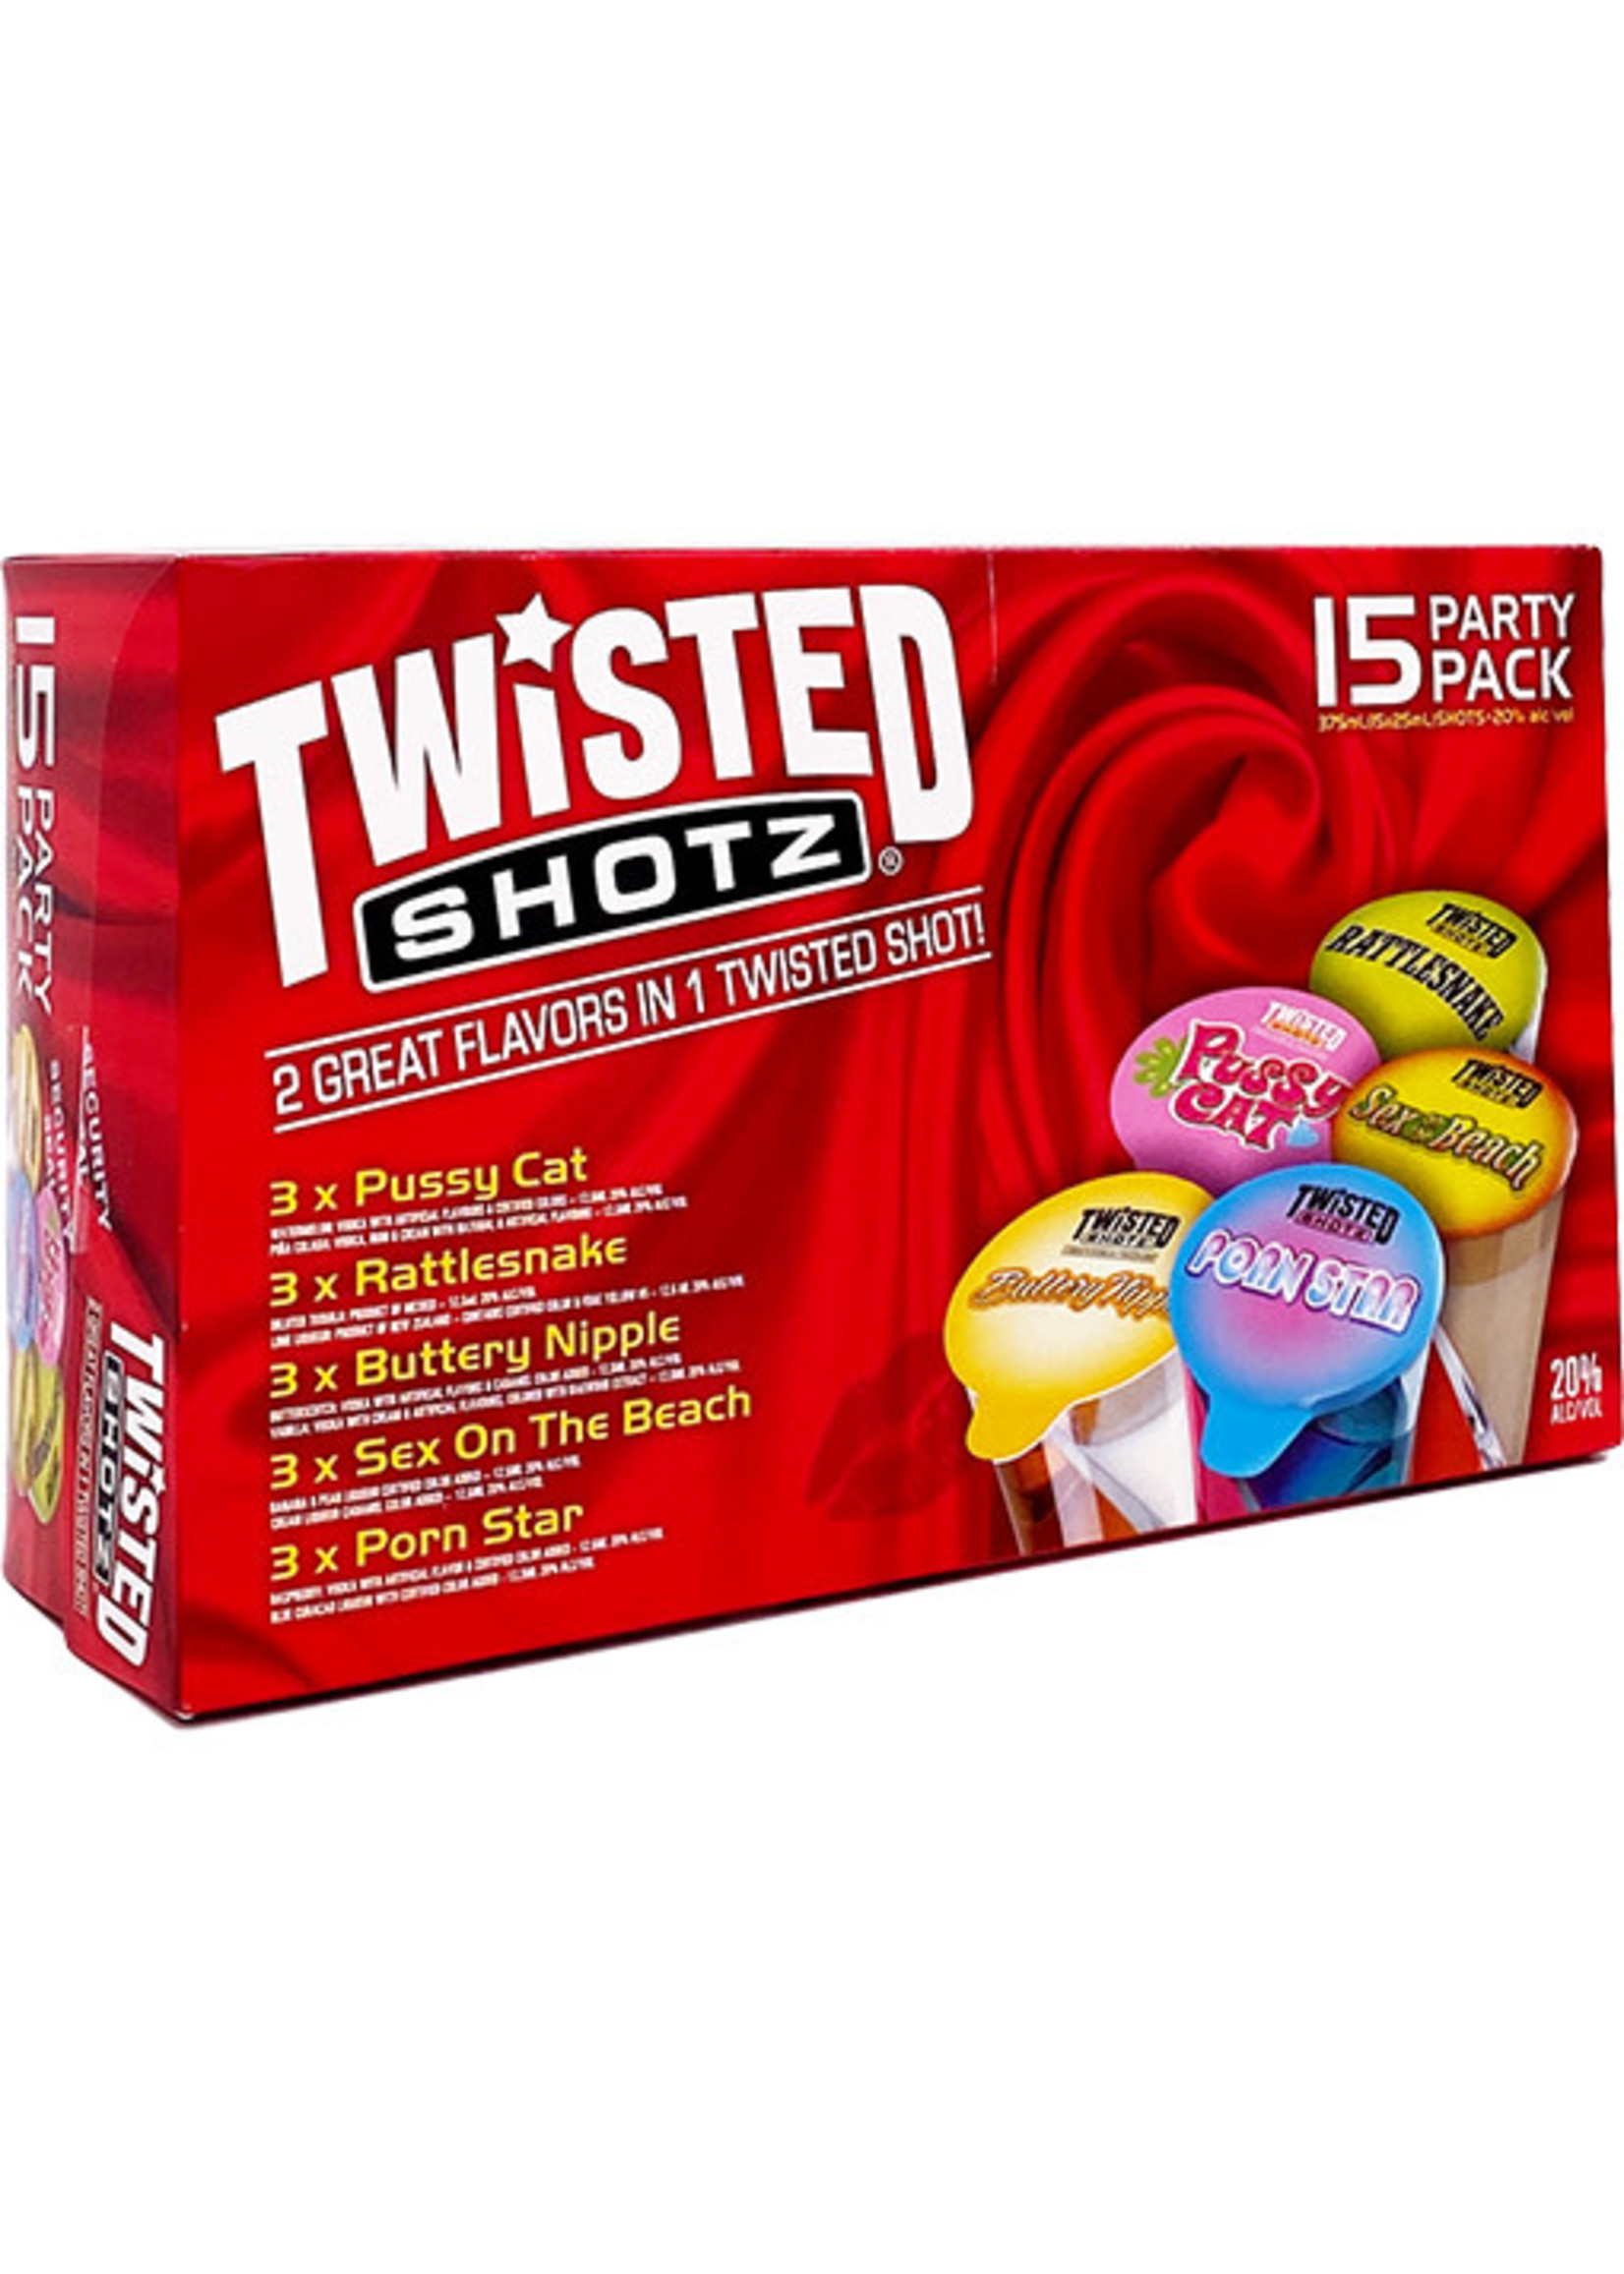 Twisted Shotz Twisted Shotz Sexy Party Pack Combo 3 Each Buttery Nipple, Porn Star, Rattlesnake, Sex On The Beach & Strawberry Sundae 15pk 25ml